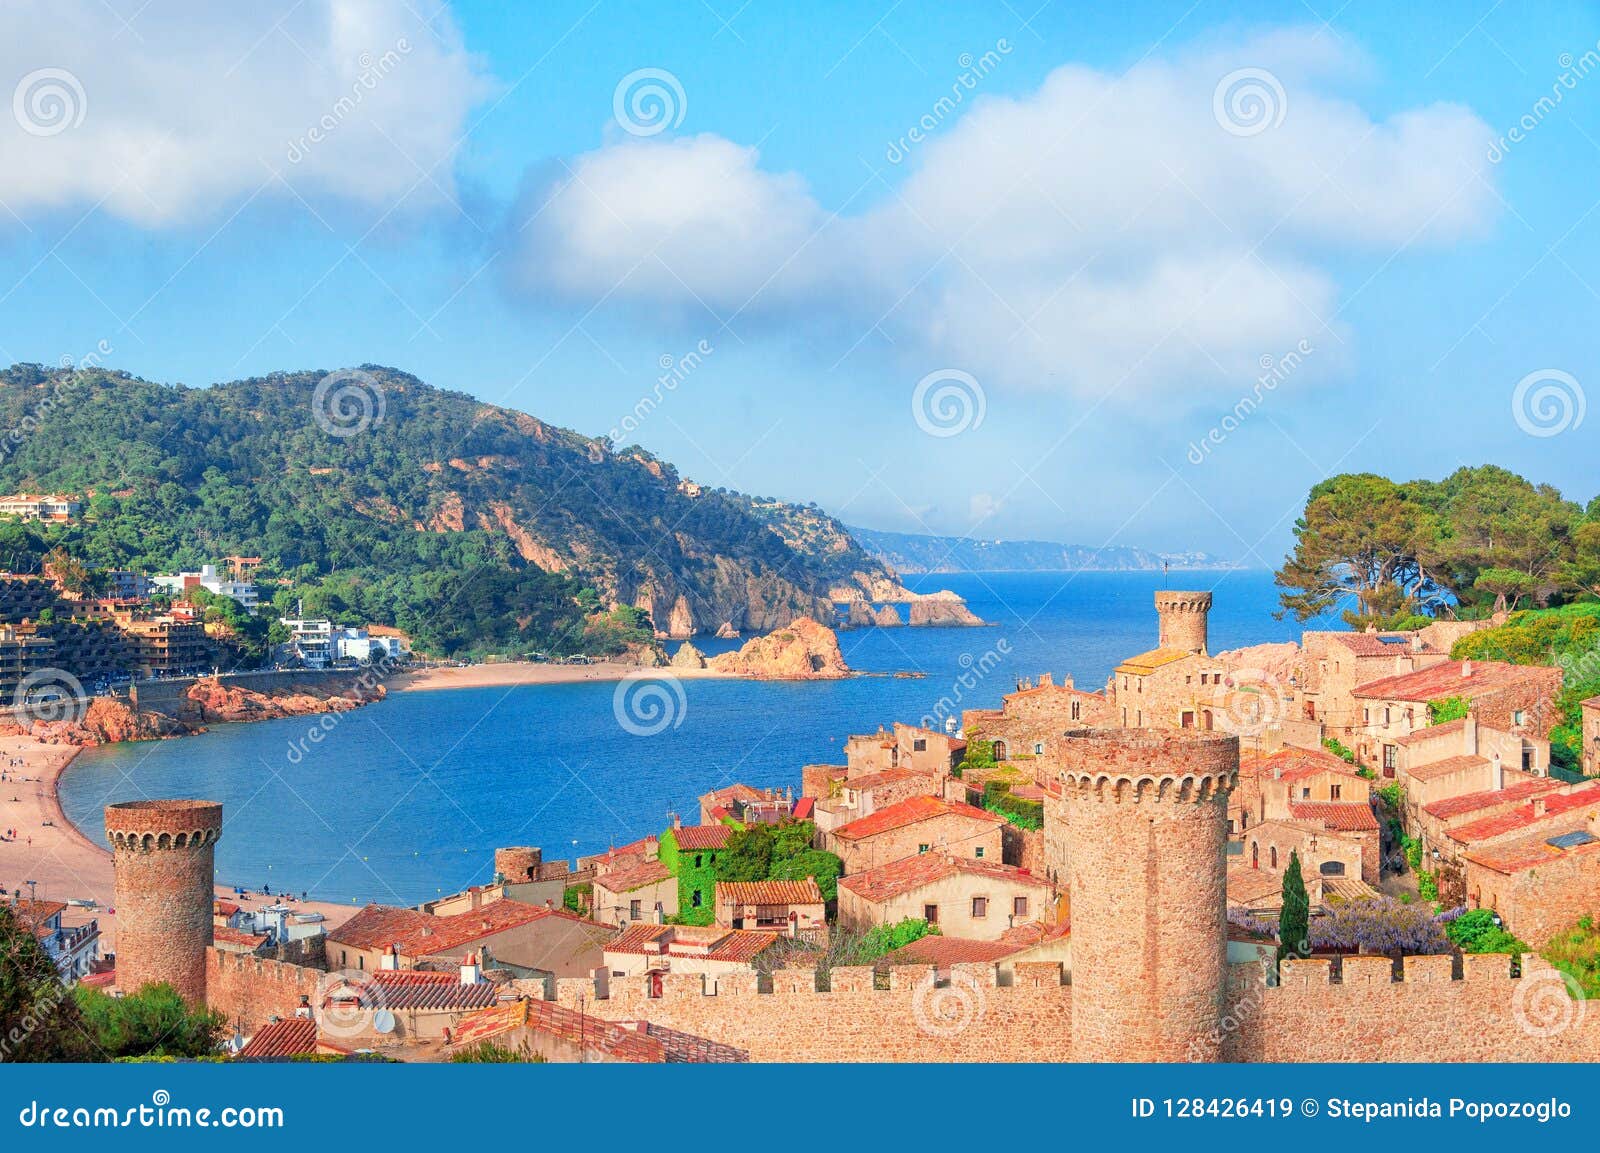 tossa de mar, costa brava, spain. view of the sea and old town.